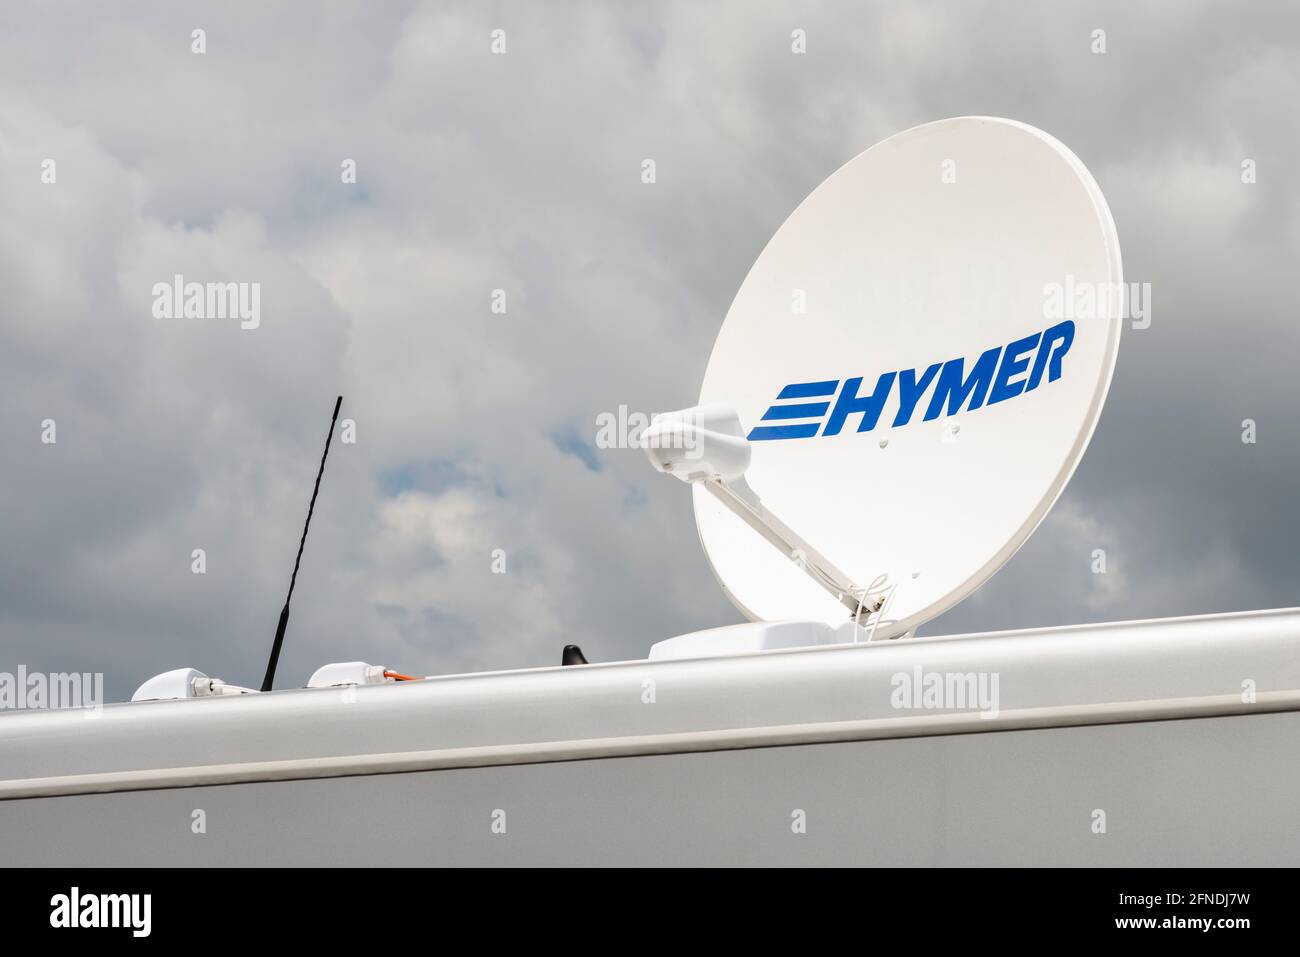 Camping and caravaning. Satellite dish or antenna reflector as Oyster Vision single satellite system on Hymer motorhome Stock Photo